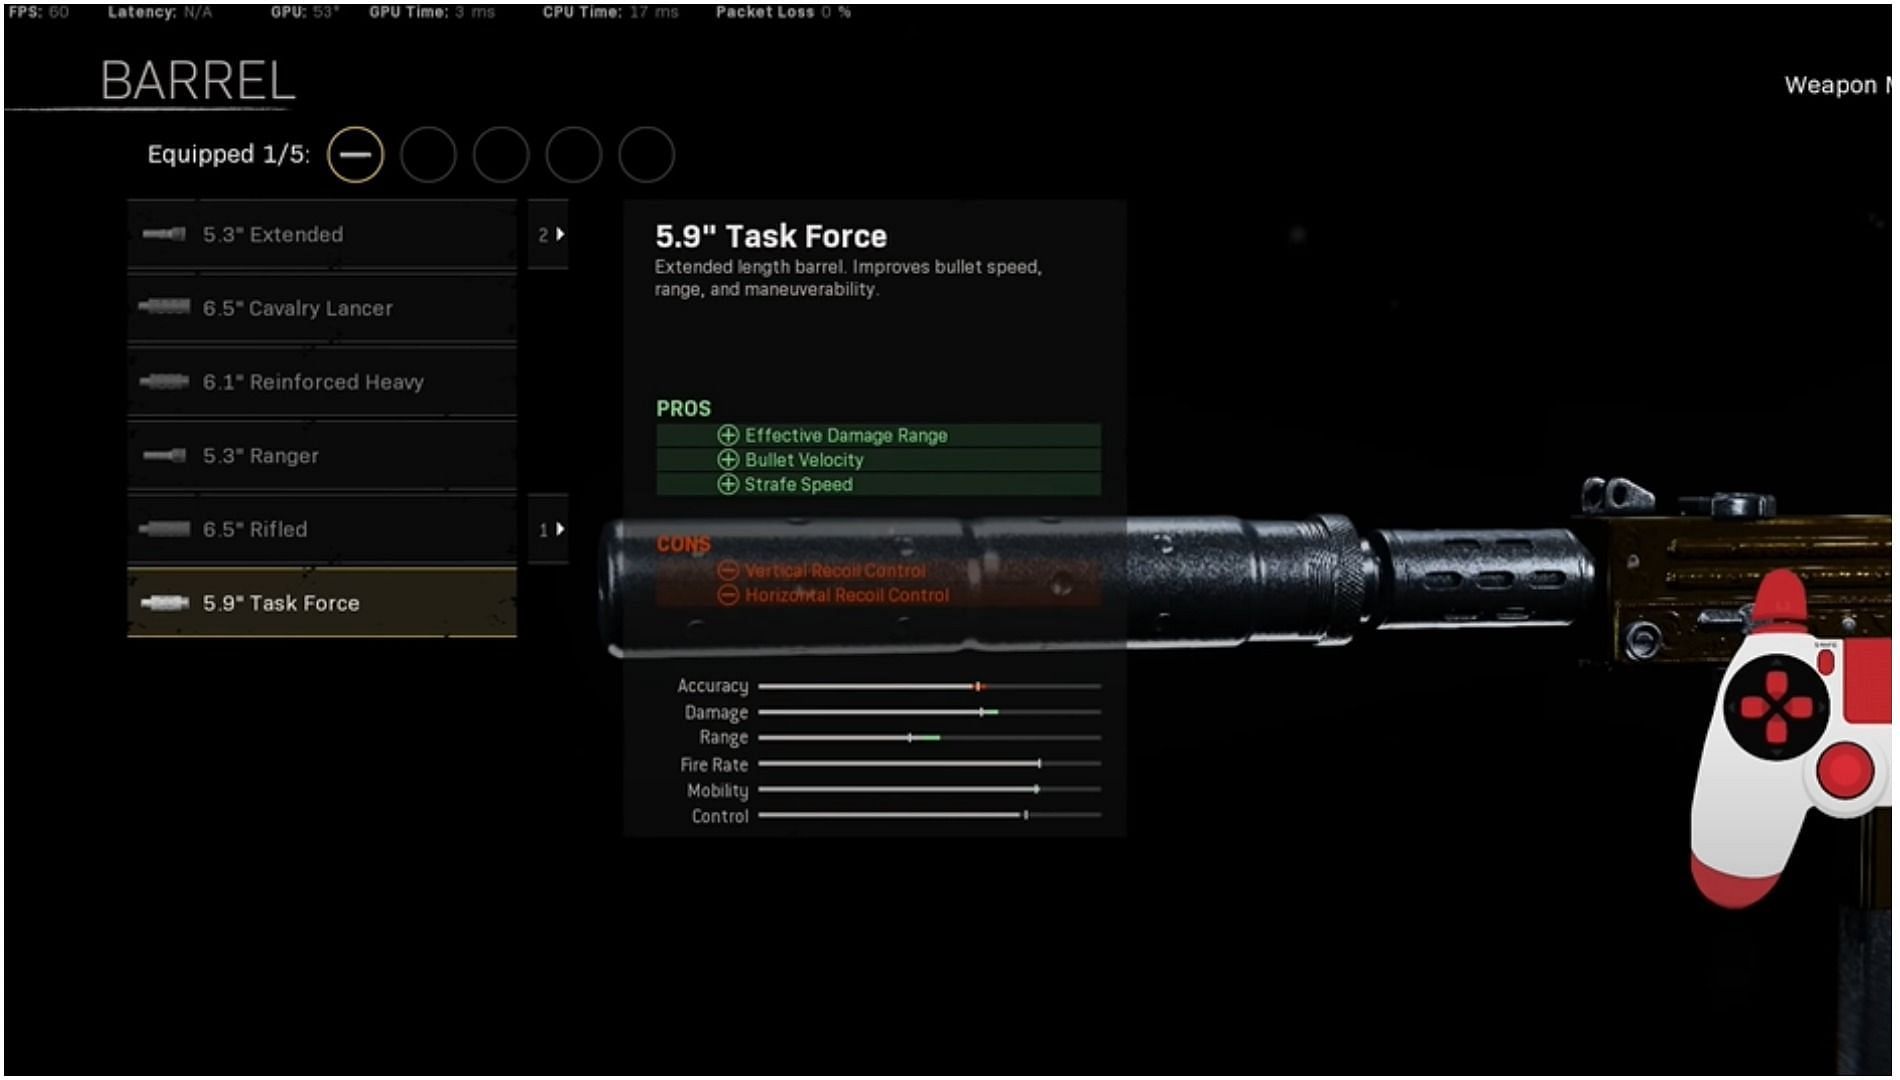 The 5.9&quot; Task Force will provide a 50% increase in damage range (Image via YouTube - Marathon)